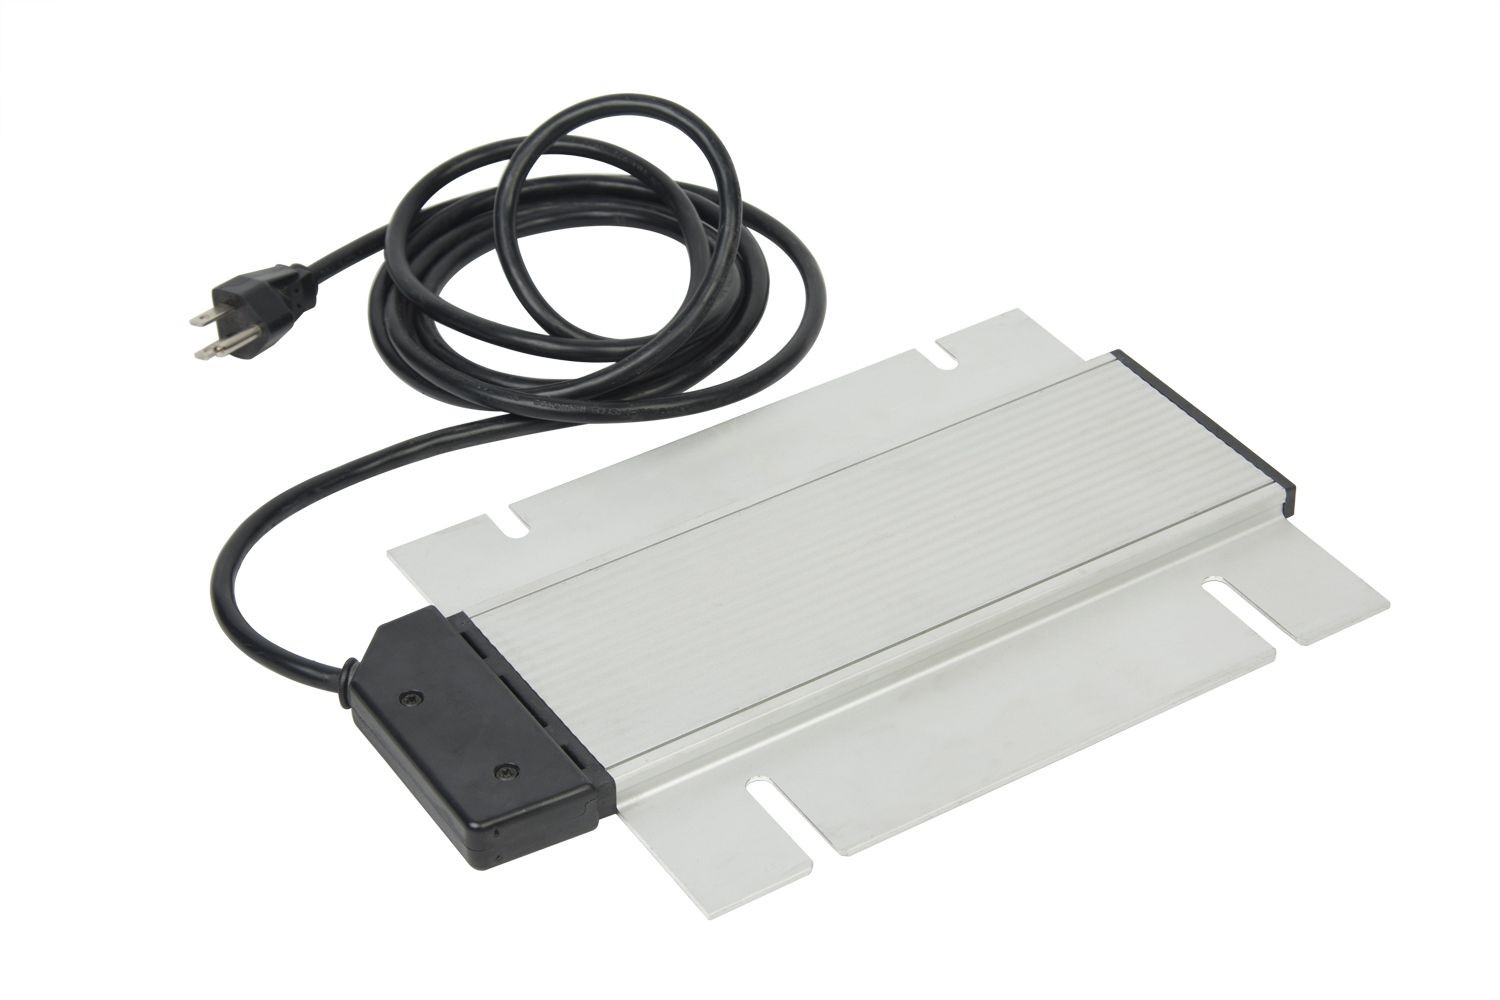 Bon Chef 12092 Rectangular Heating Plate for Chafing Dish, 9 7/8" x 7 7/8"